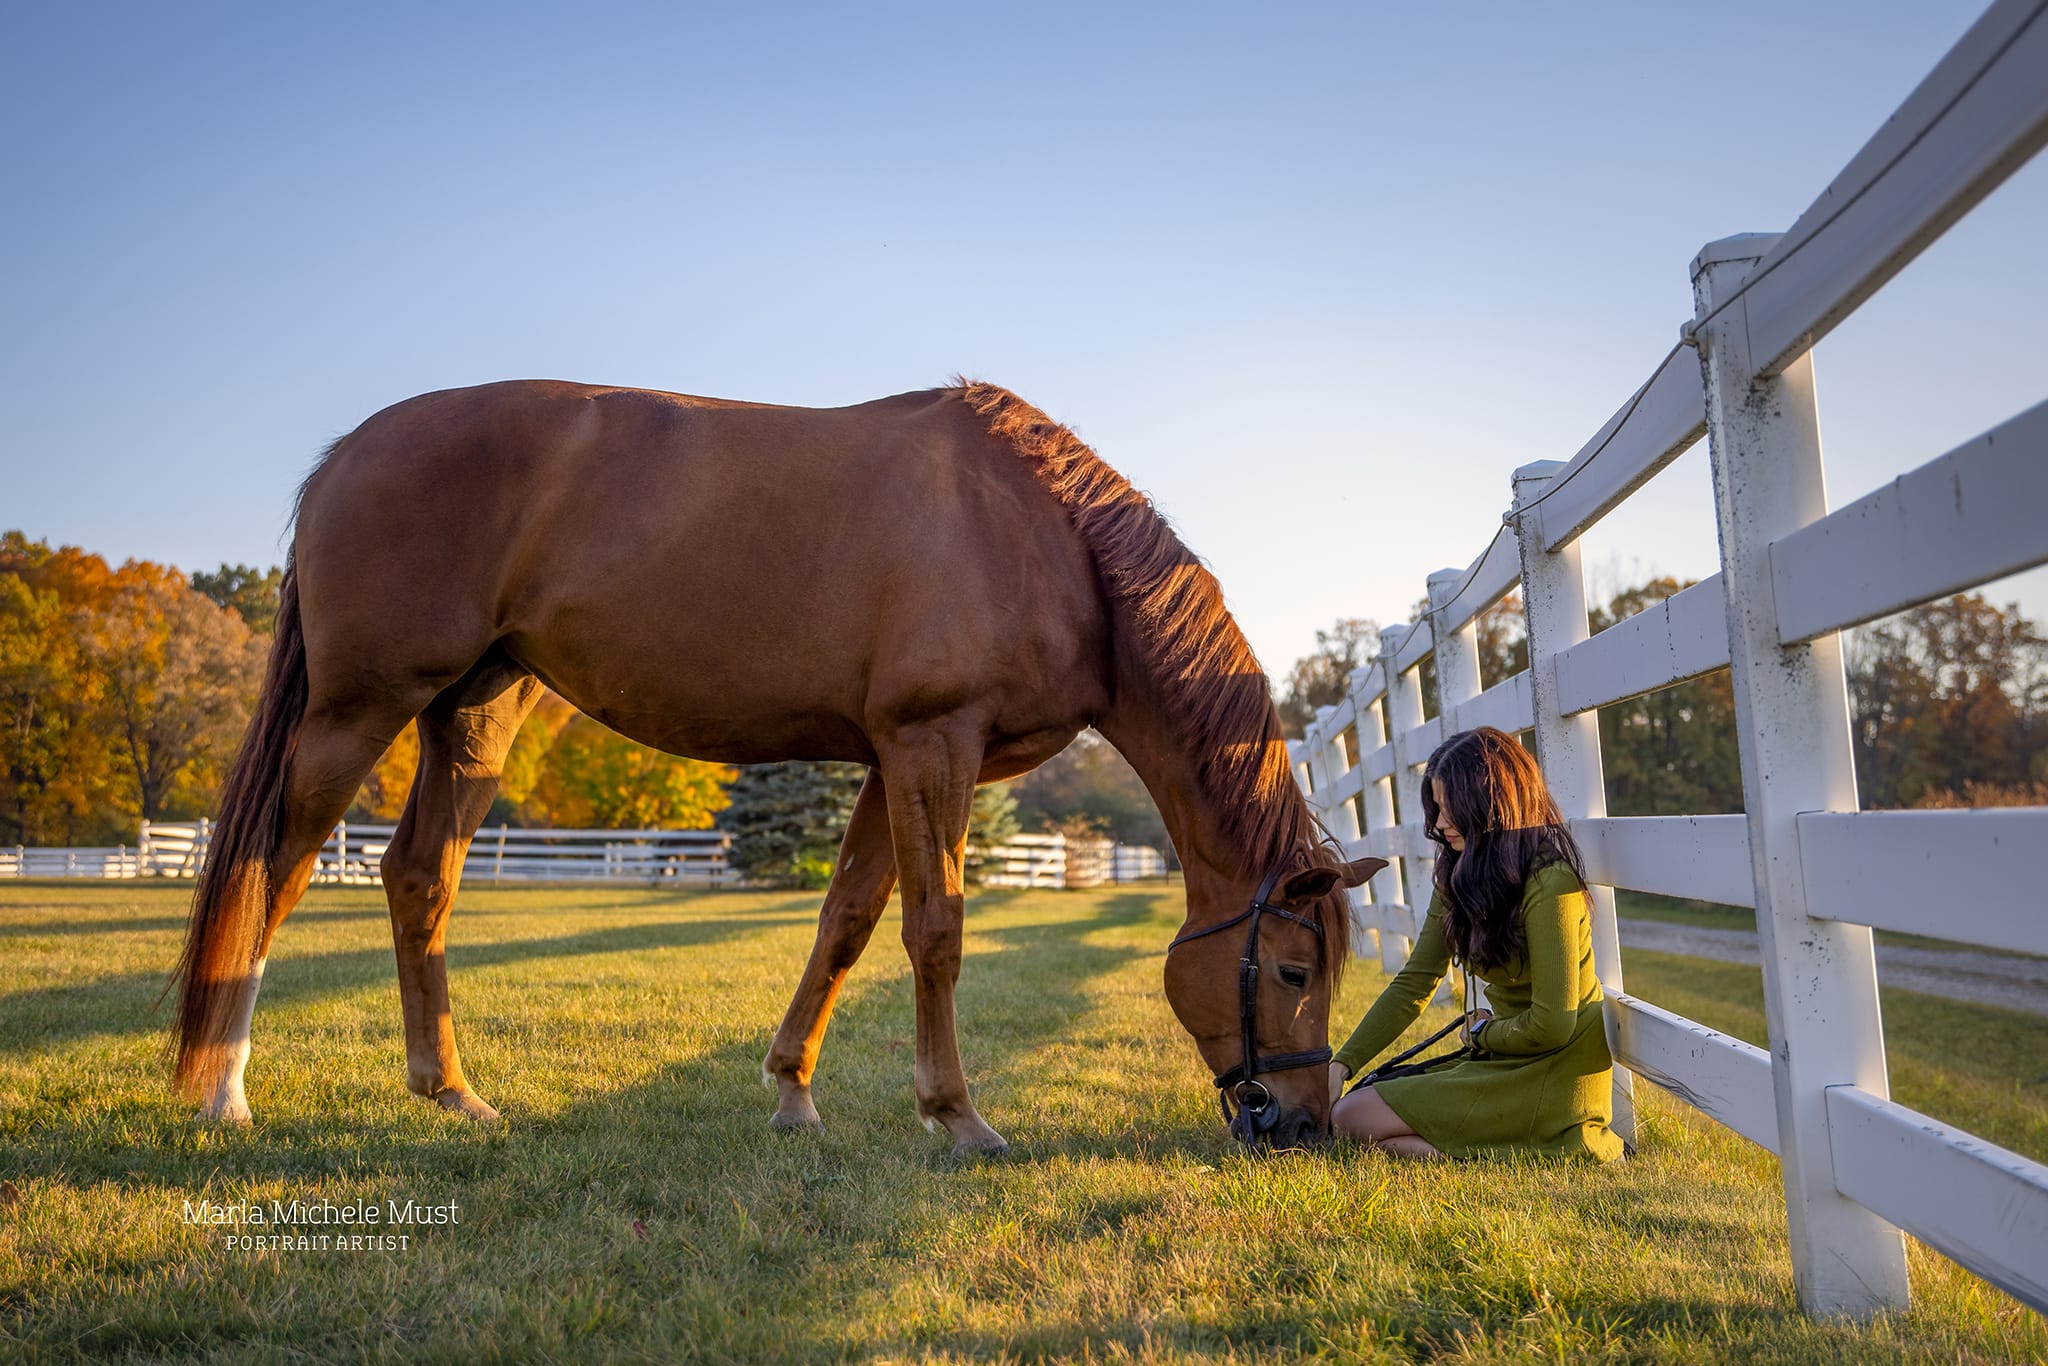 Bright and sunny moment between horse and rider captured by a Detroit horse photographer, highlighting the bond between a horse and its owner against the backdrop of a trail and fence.